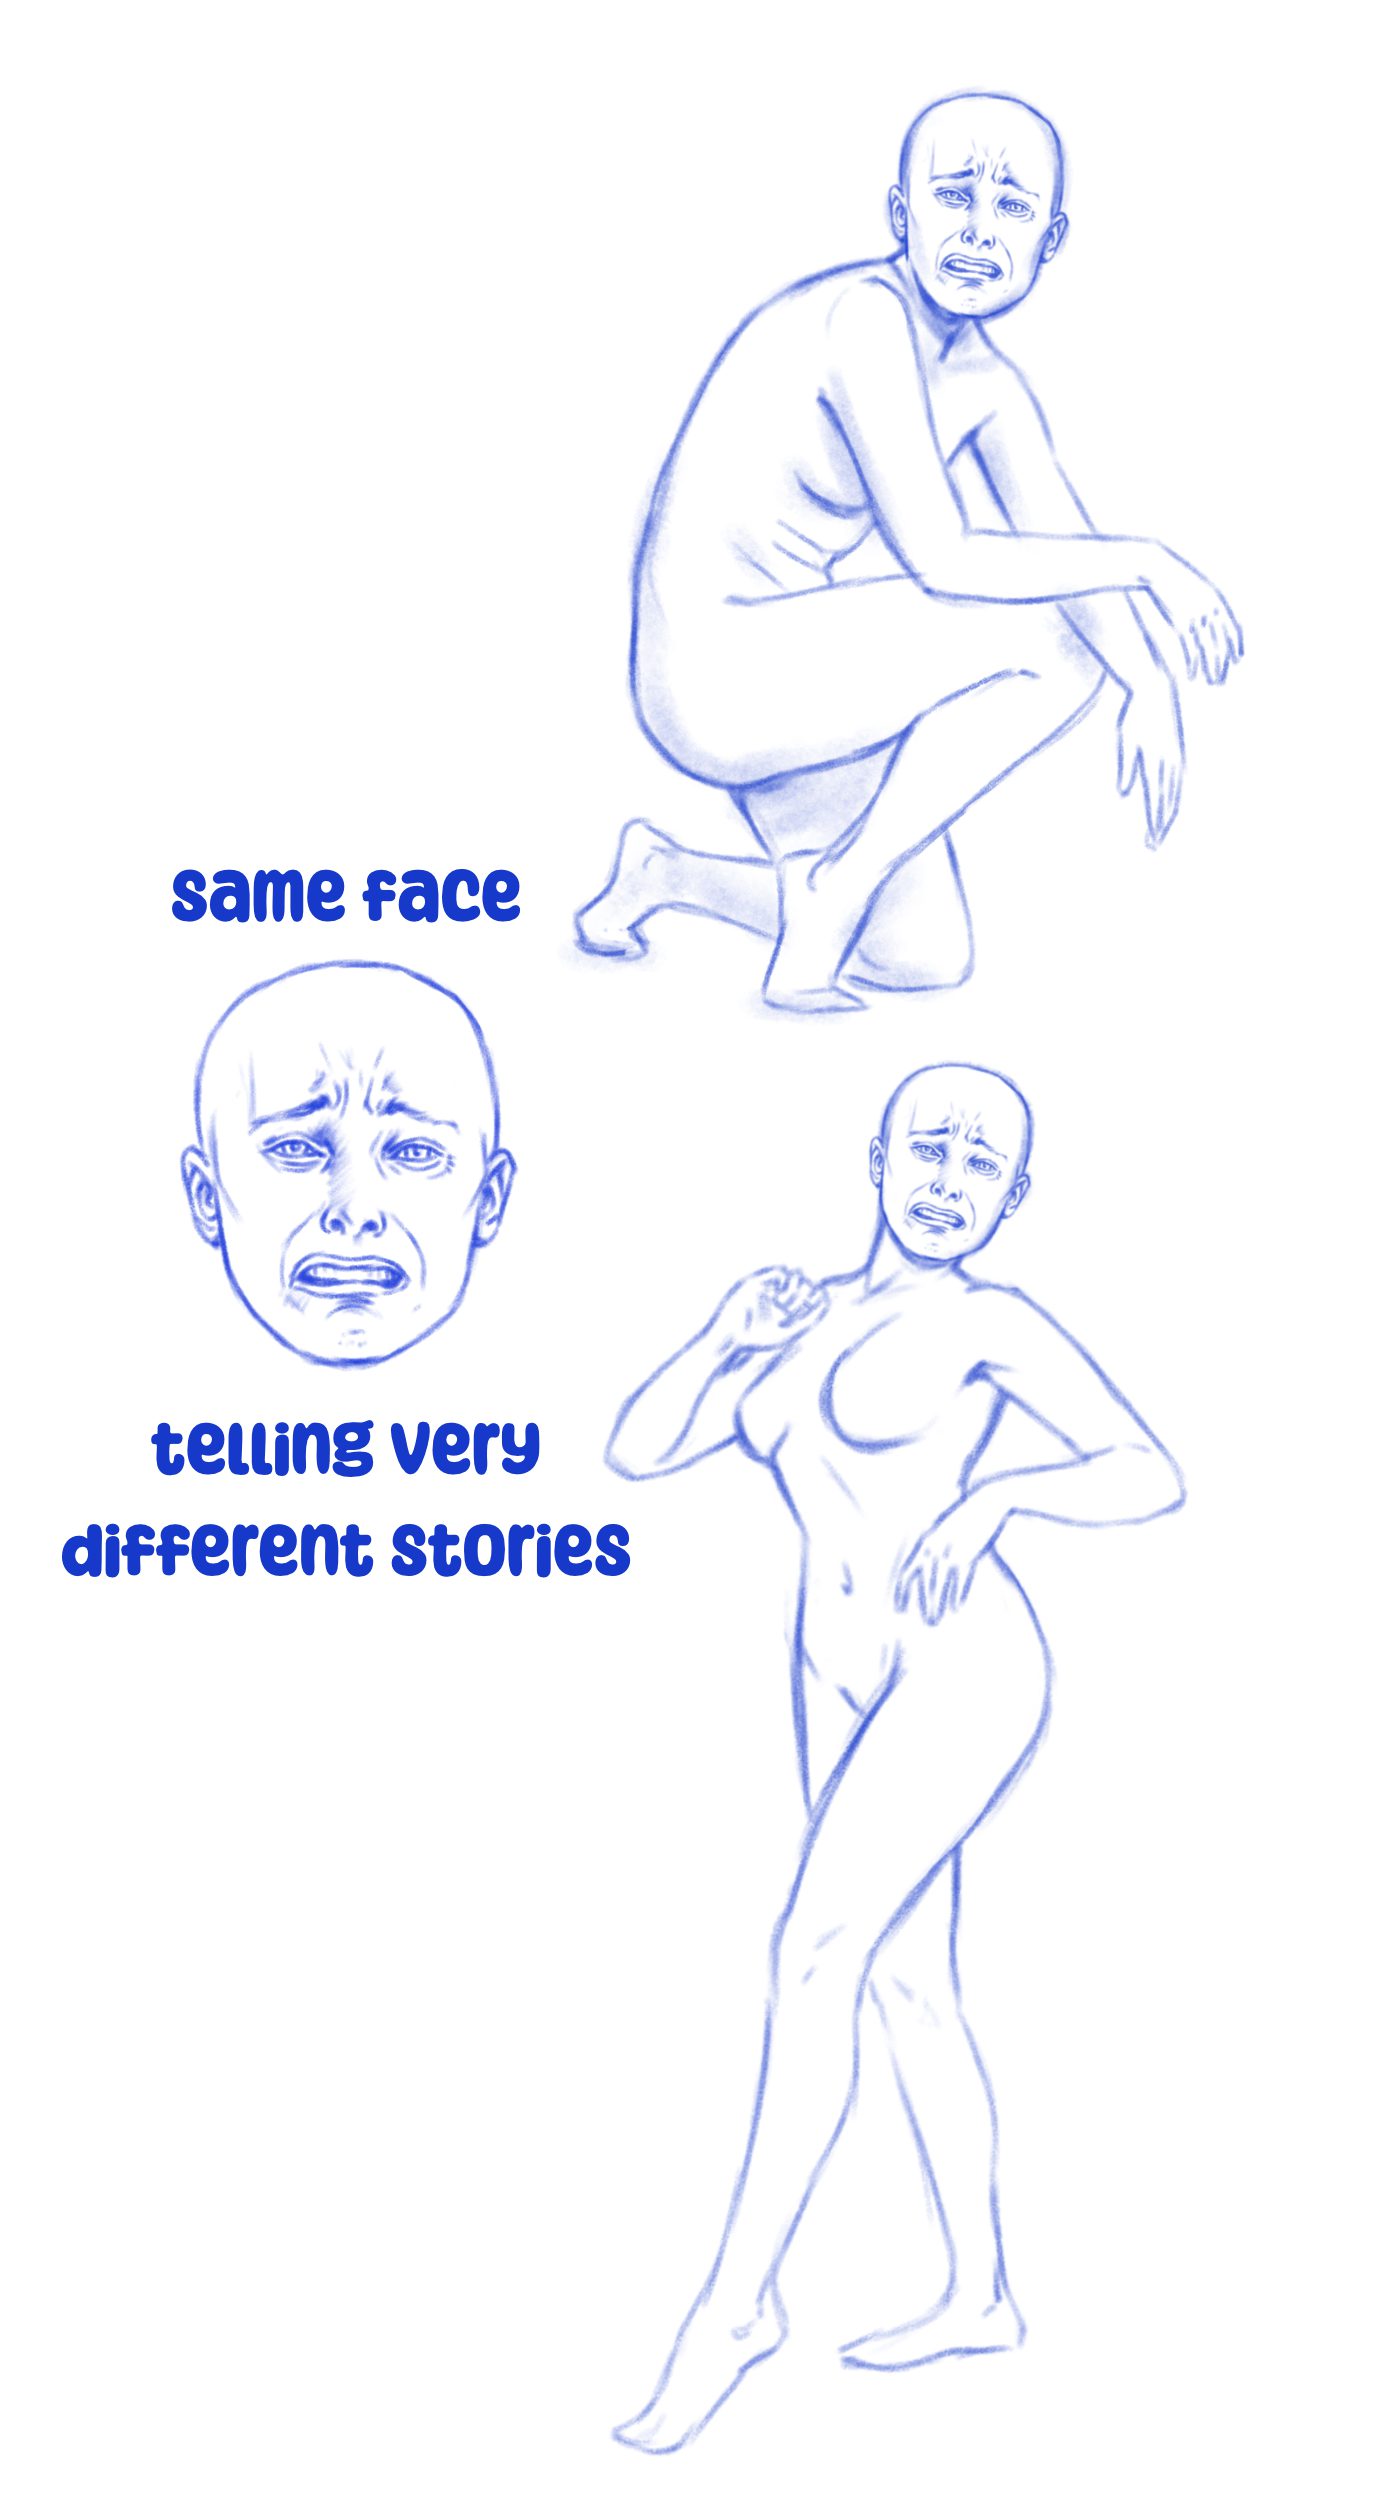 combining expressions and body language sketch